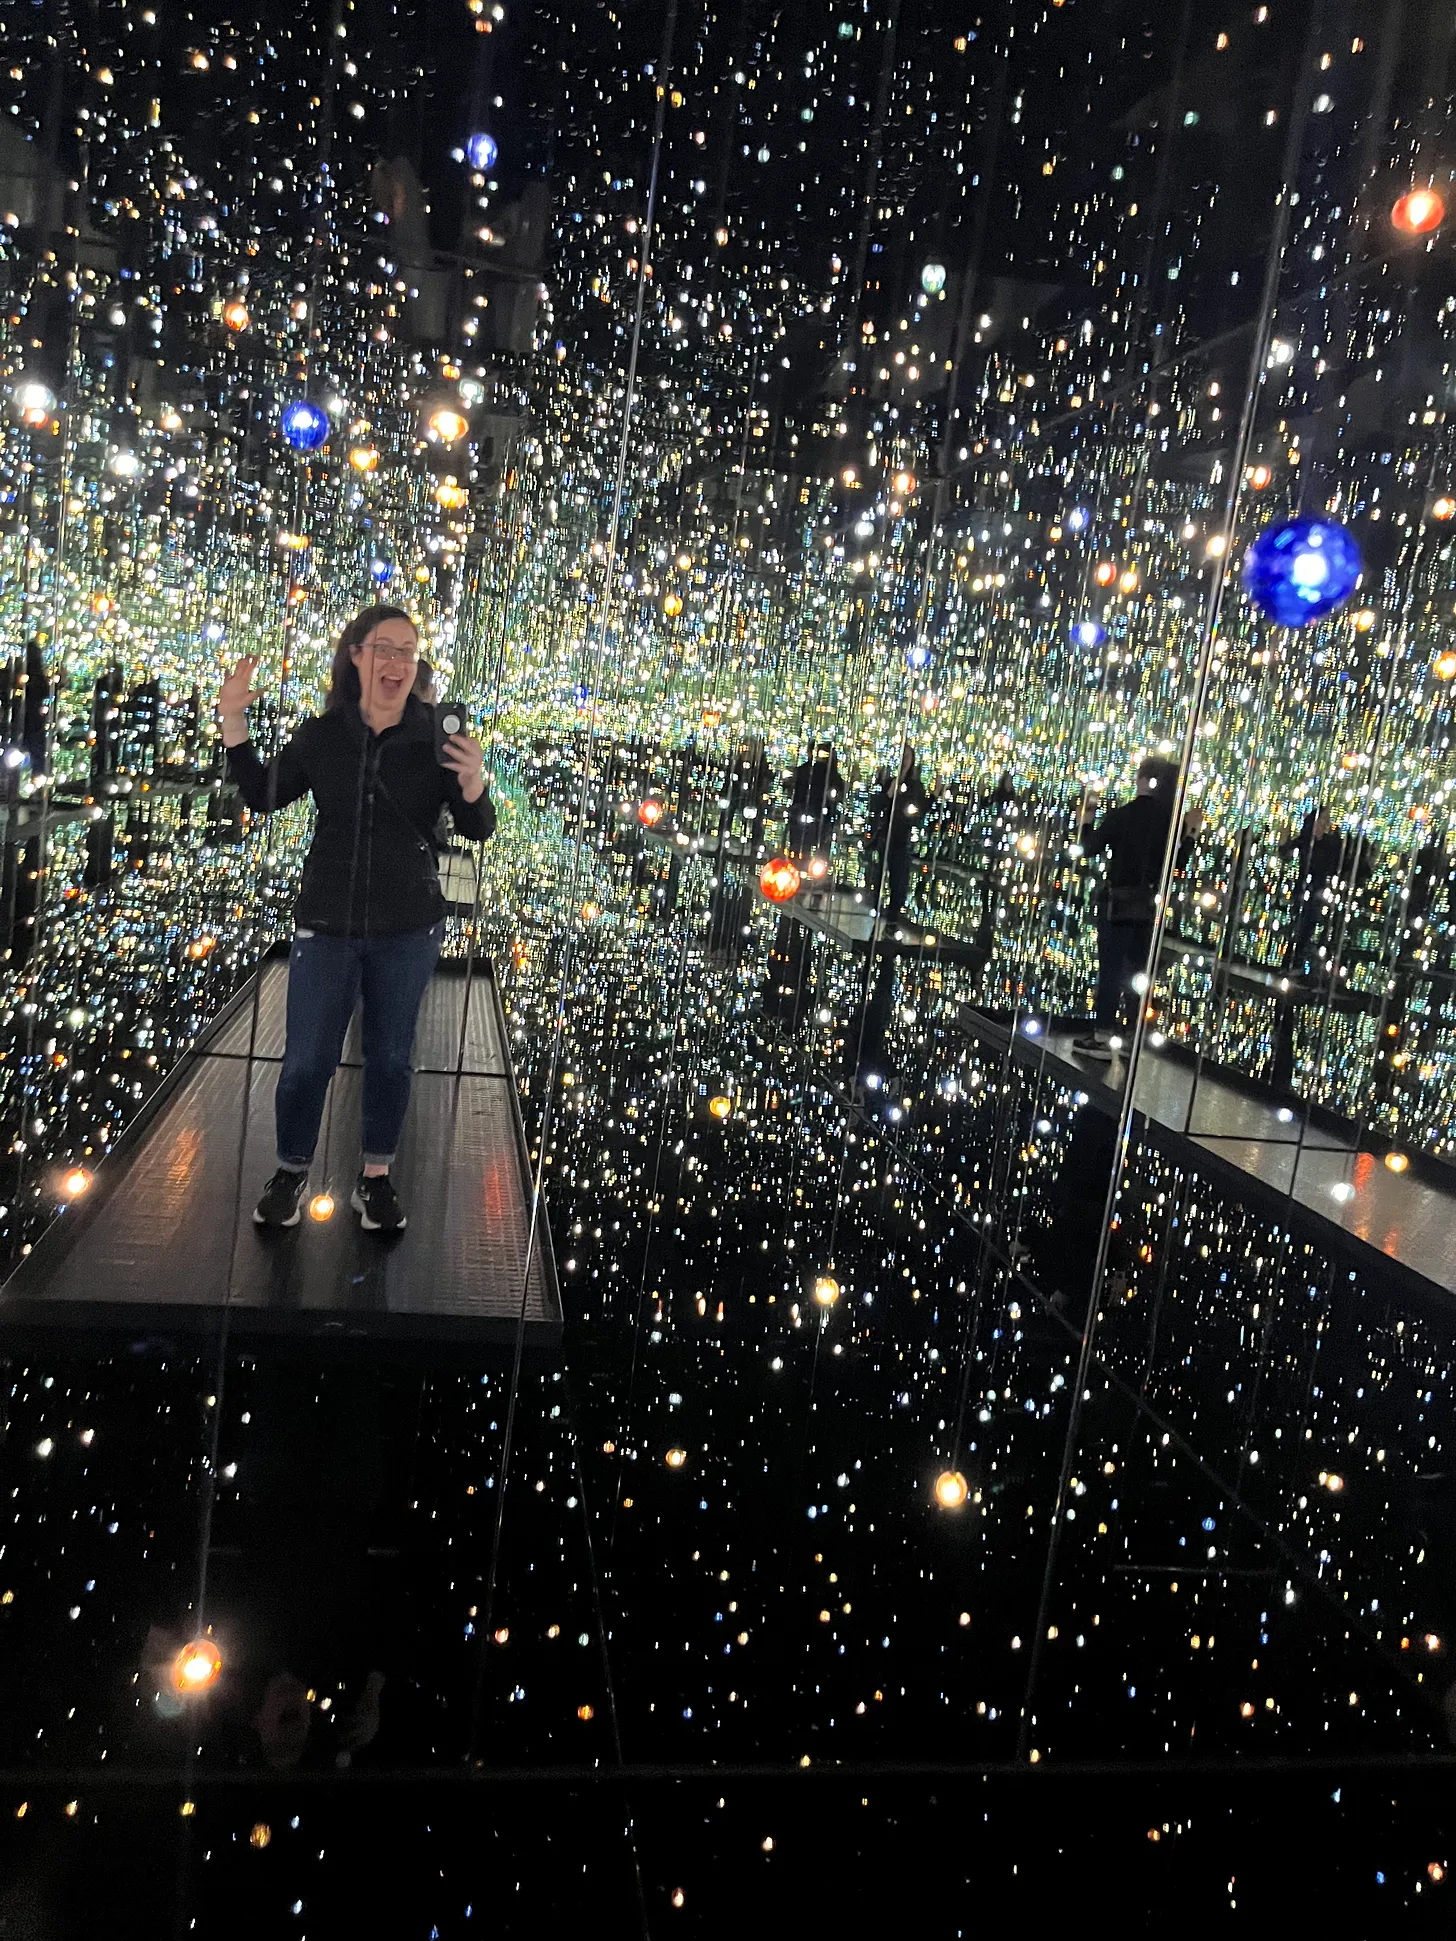 Sam tackeff standing in a darkened room filled with thousands of pinpoints of light and mirrored walls by the artist yayoi kusama